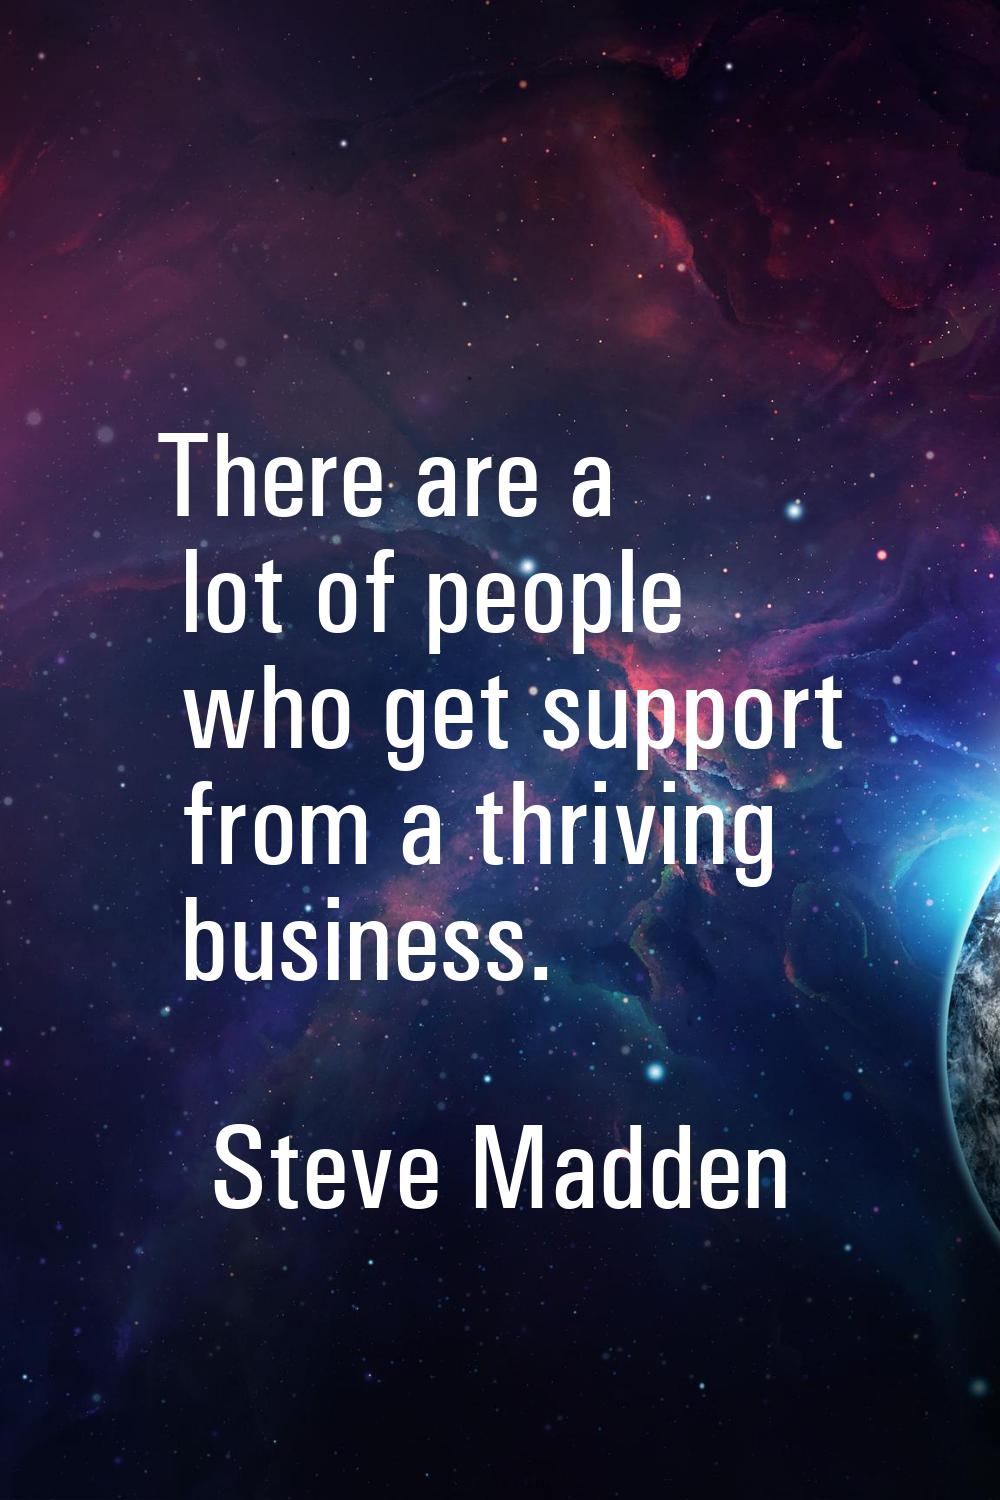 There are a lot of people who get support from a thriving business.